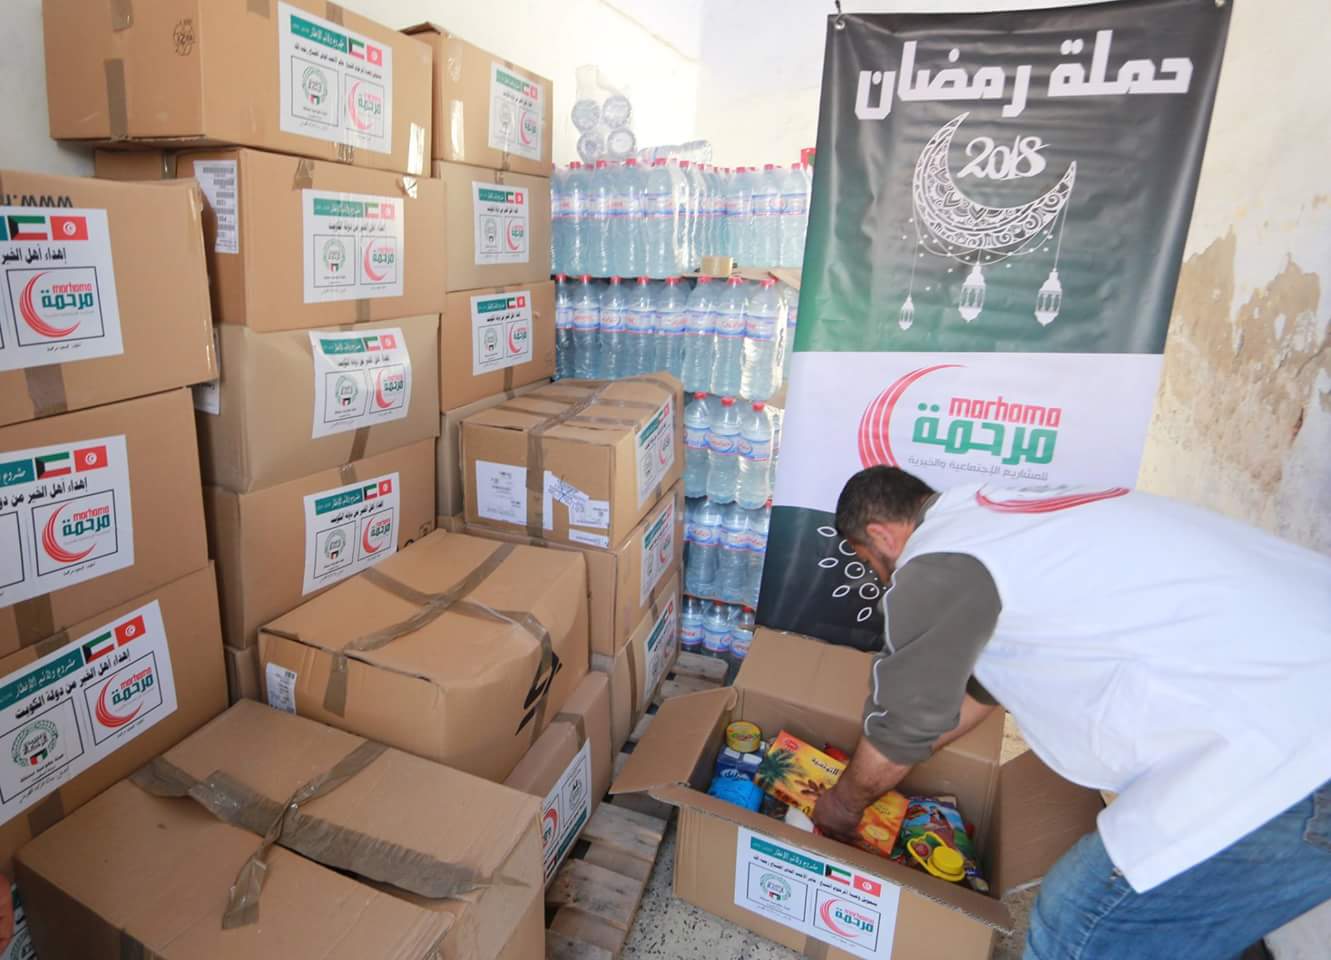 Marhamah Society launched a charity campaign in Tunisia in Ramadan to distribute more than 5,000 food baskets to needy families